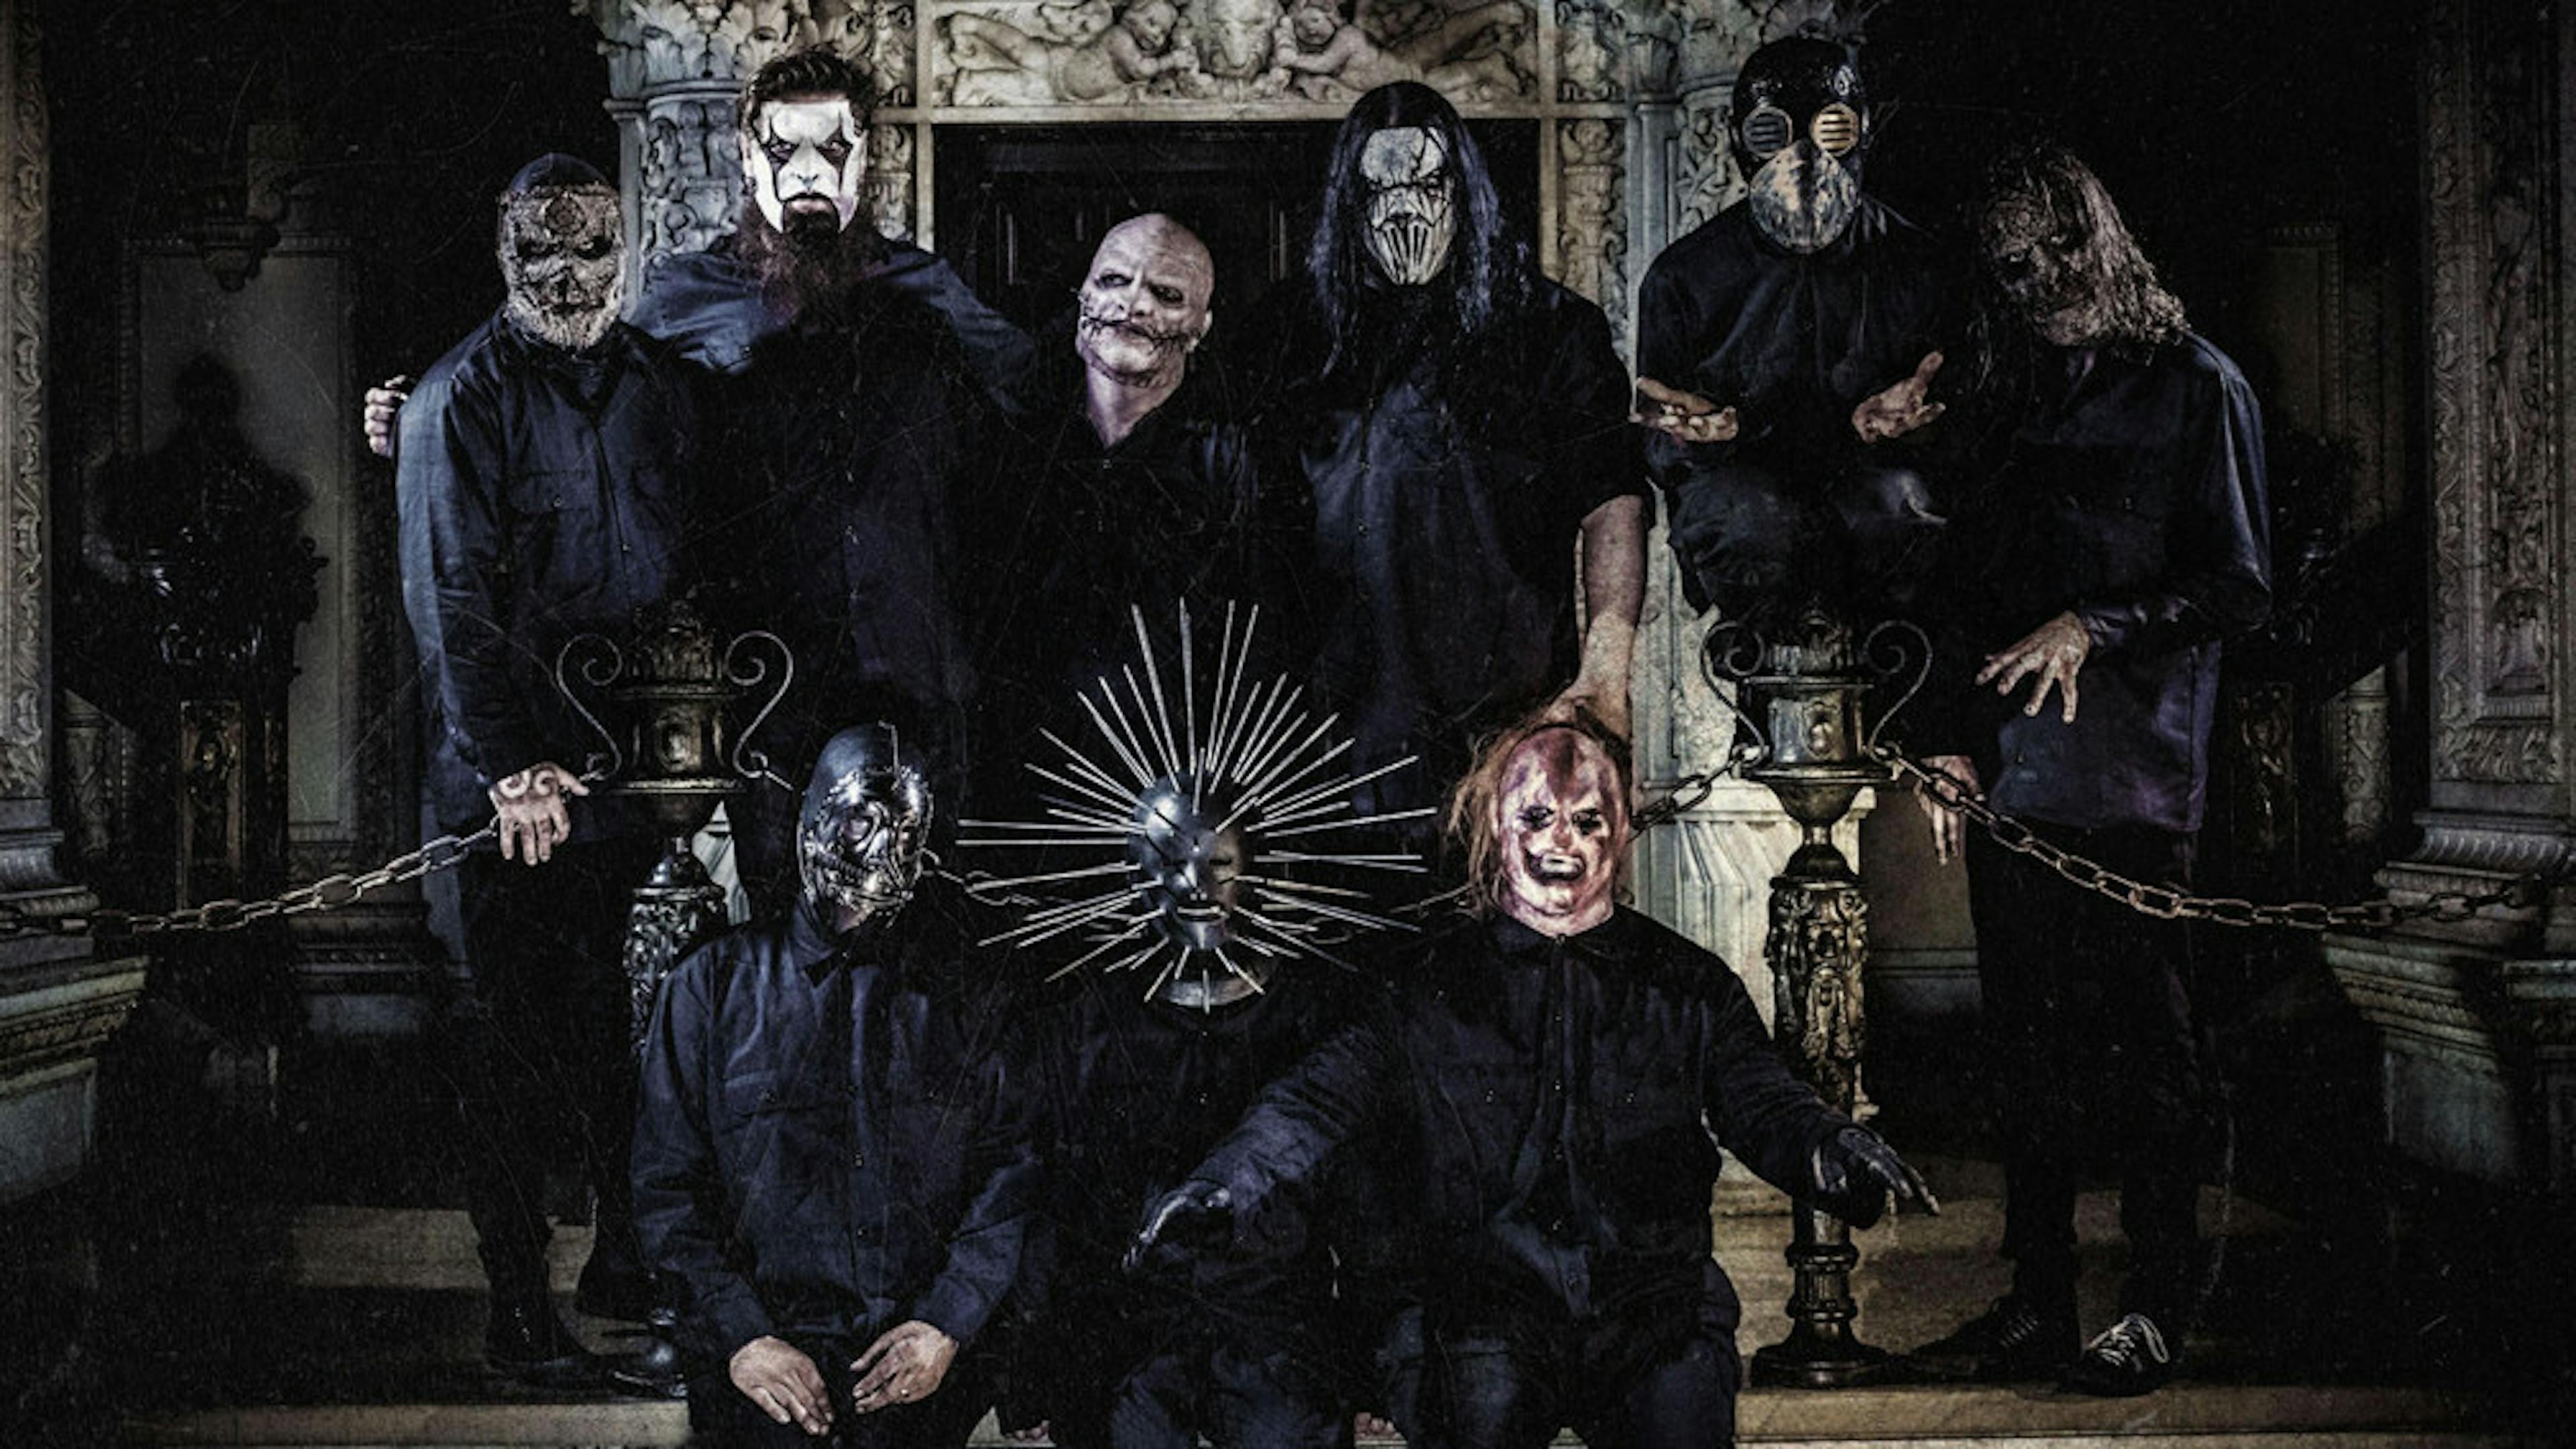 Corey Taylor Discusses Subject Matter Of New Slipknot Record